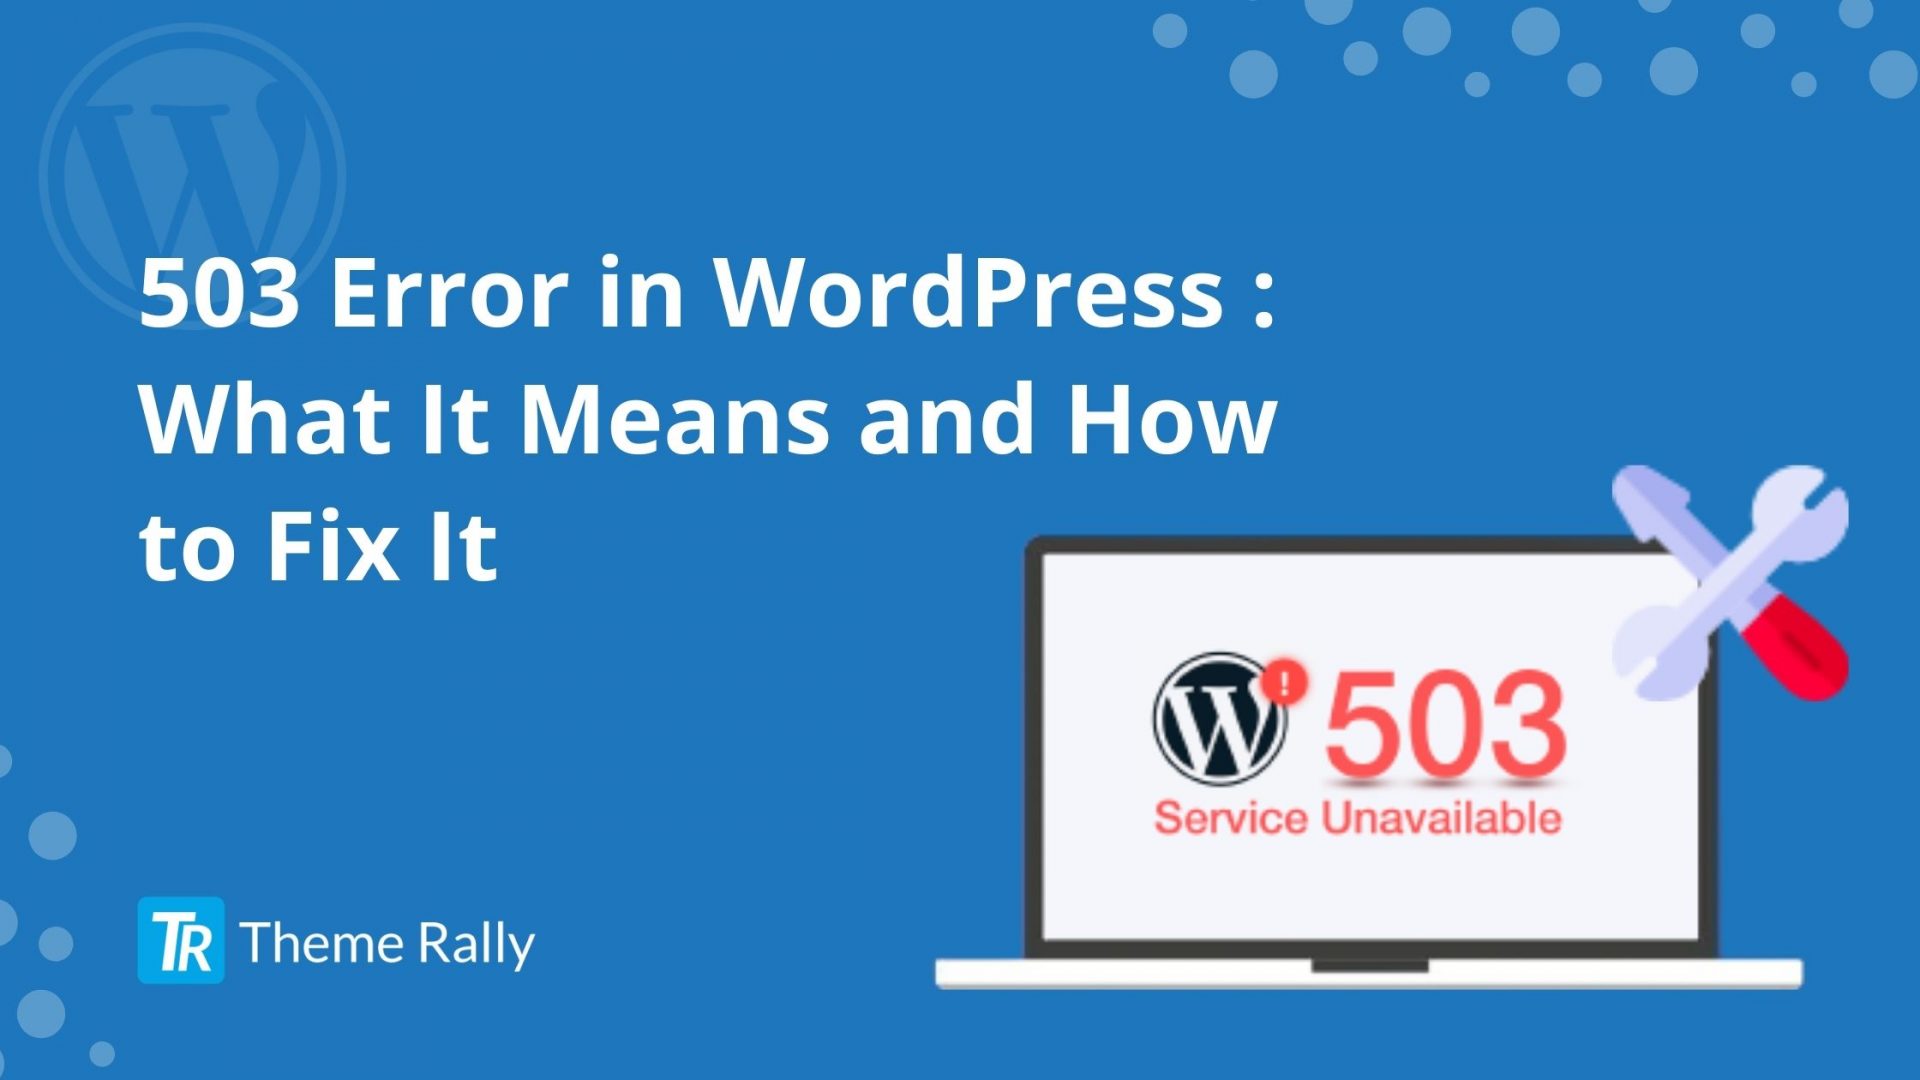 503 Error in WordPress : What It Means and How to Fix It